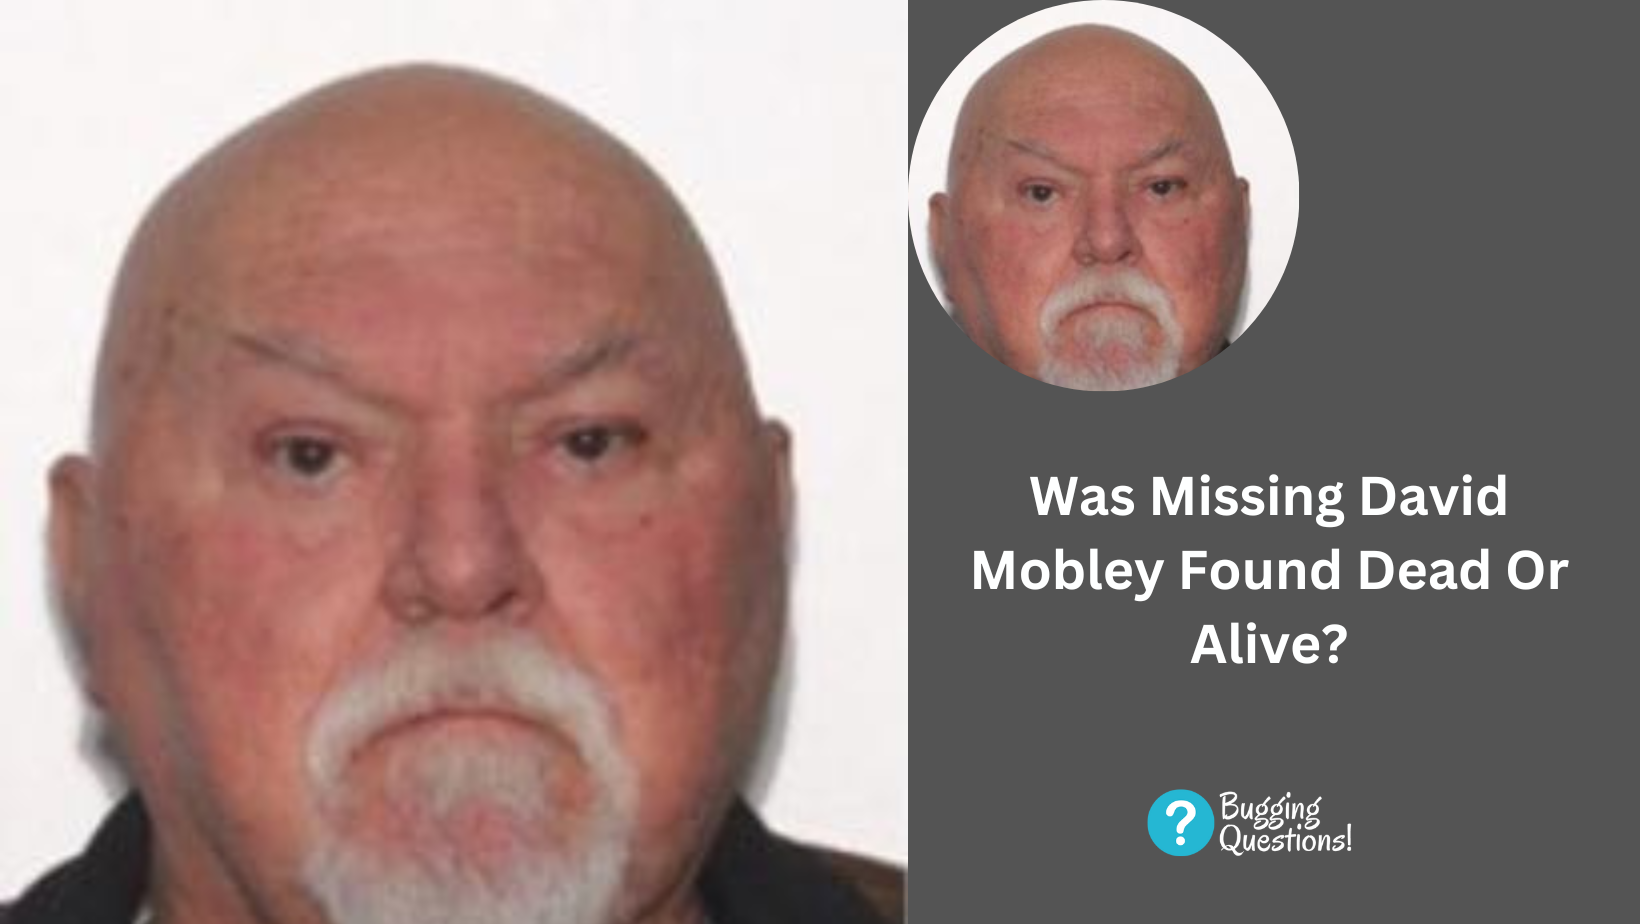 Was Missing David Mobley Found Dead Or Alive?